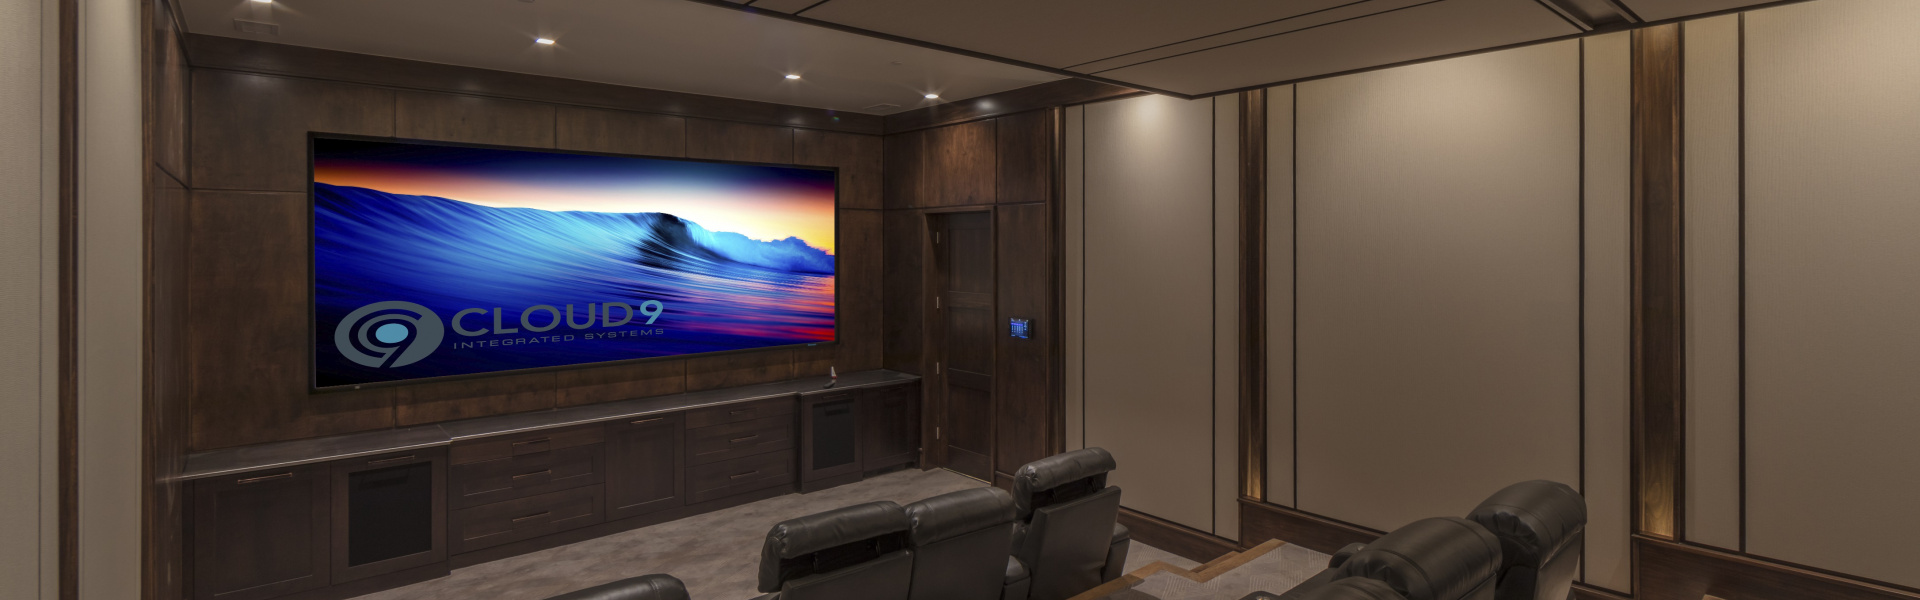 Smart home installation by Cloud 9 Integrated Systems for Vail